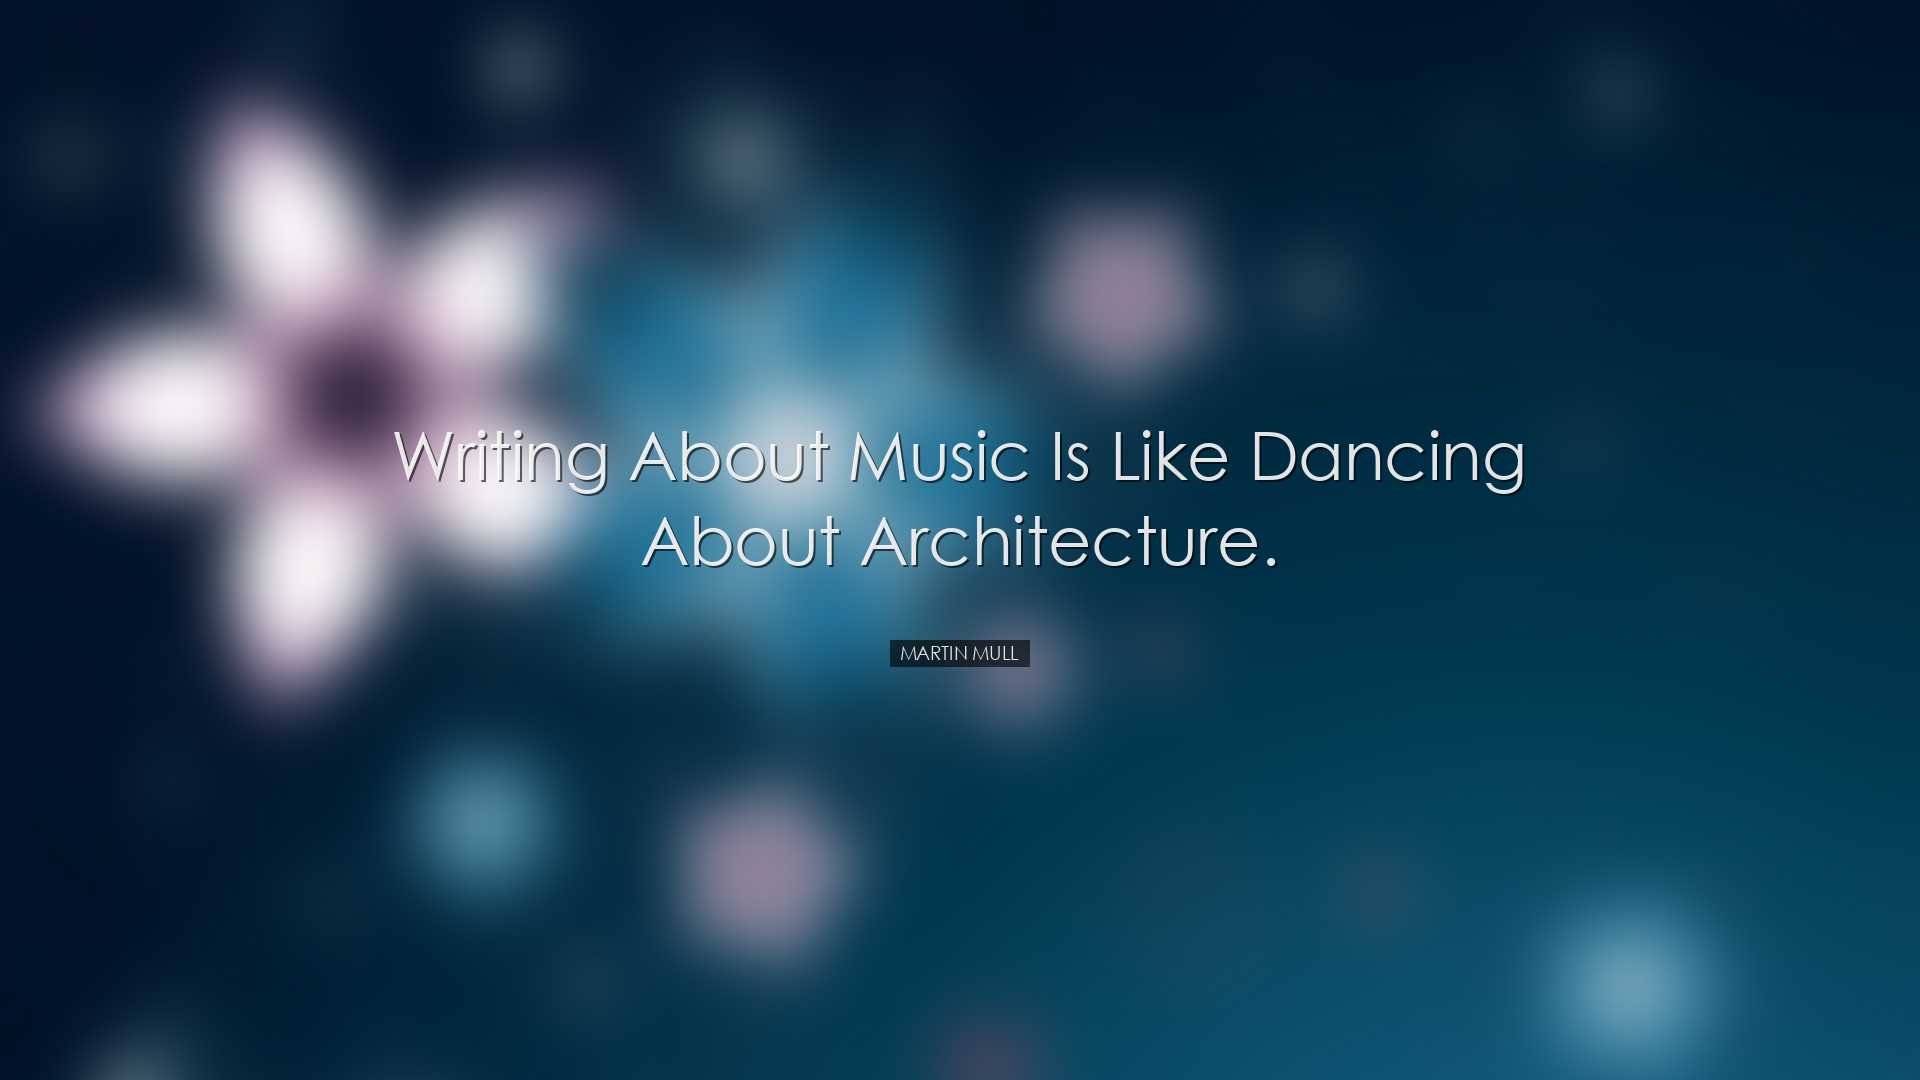 Writing about music is like dancing about architecture. - Martin M